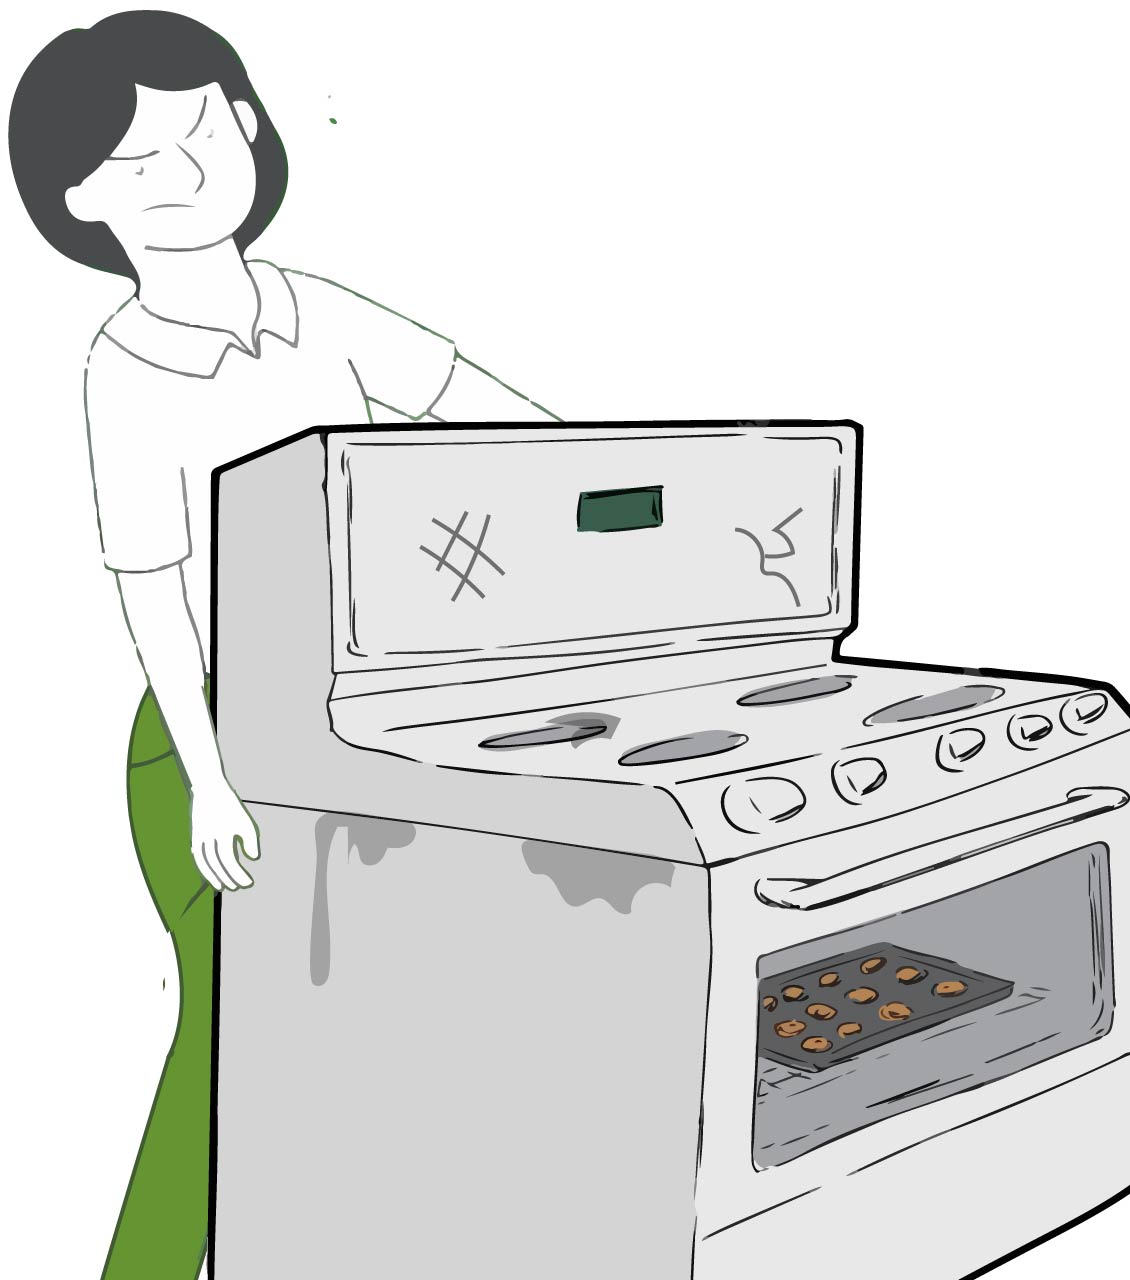 Toledo oven removal services